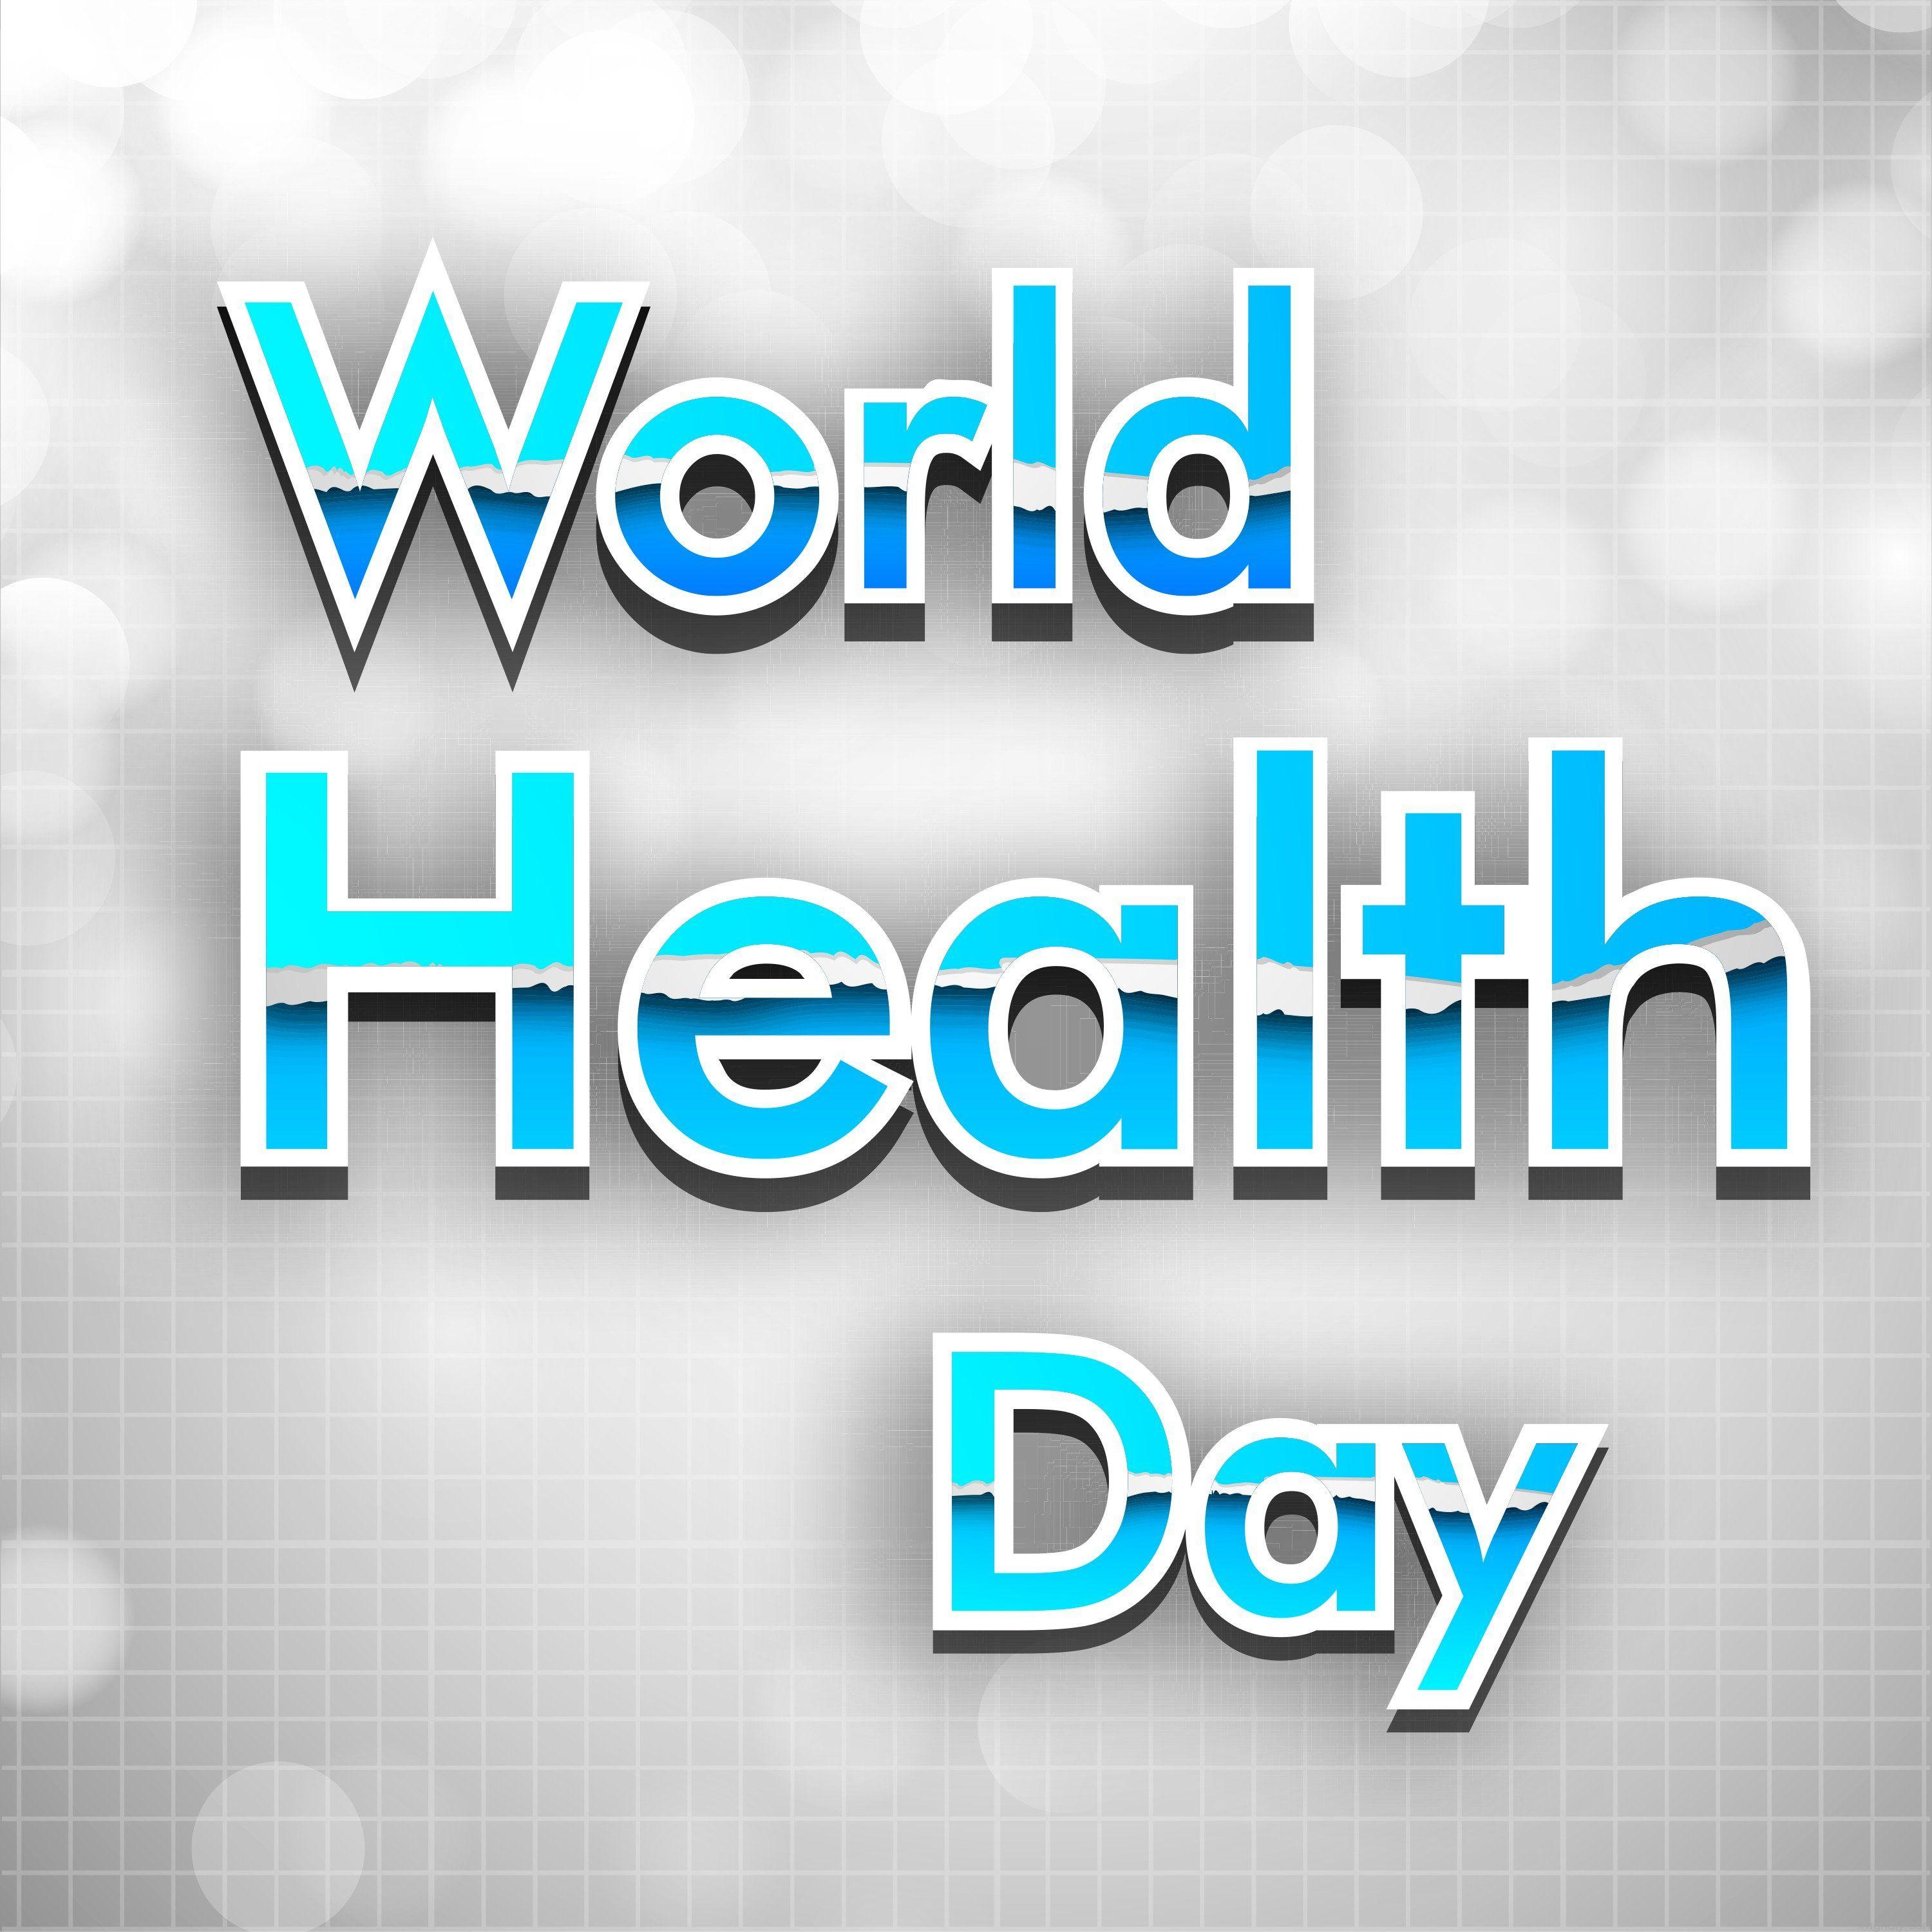 World Health Day Picture and Image